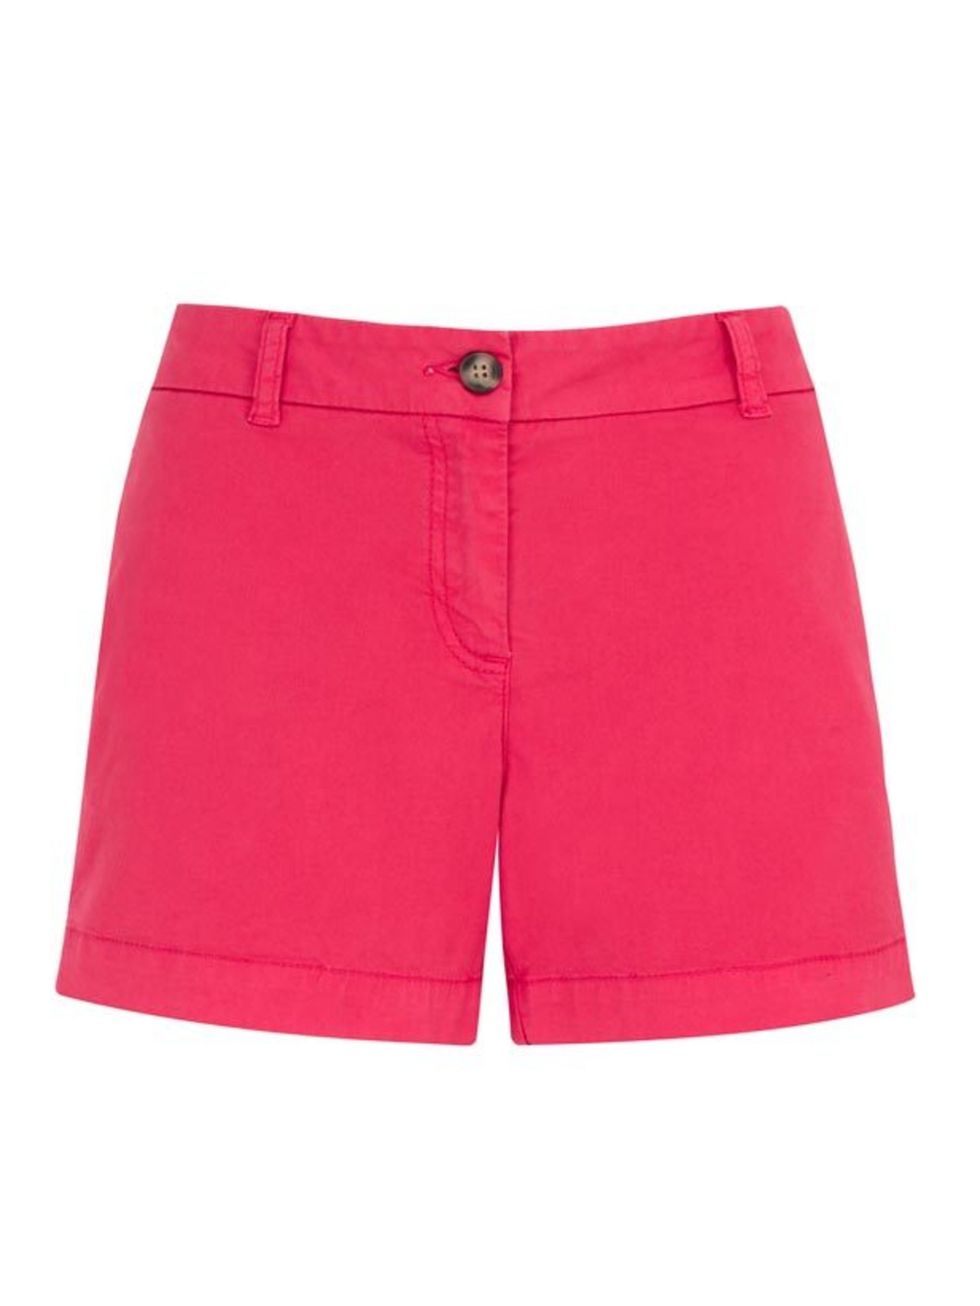 <p>If you want to tap into the colour-blocking trend without the heavy price tag, try this great pair of pink shorts from M&amp;S... <a href="http://www.marksandspencer.com/Cotton-Rich-Flat-Front-Shorts/dp/B0051KNBBO?ie=UTF8&amp;ref=sr_1_13&amp;nodeId=736